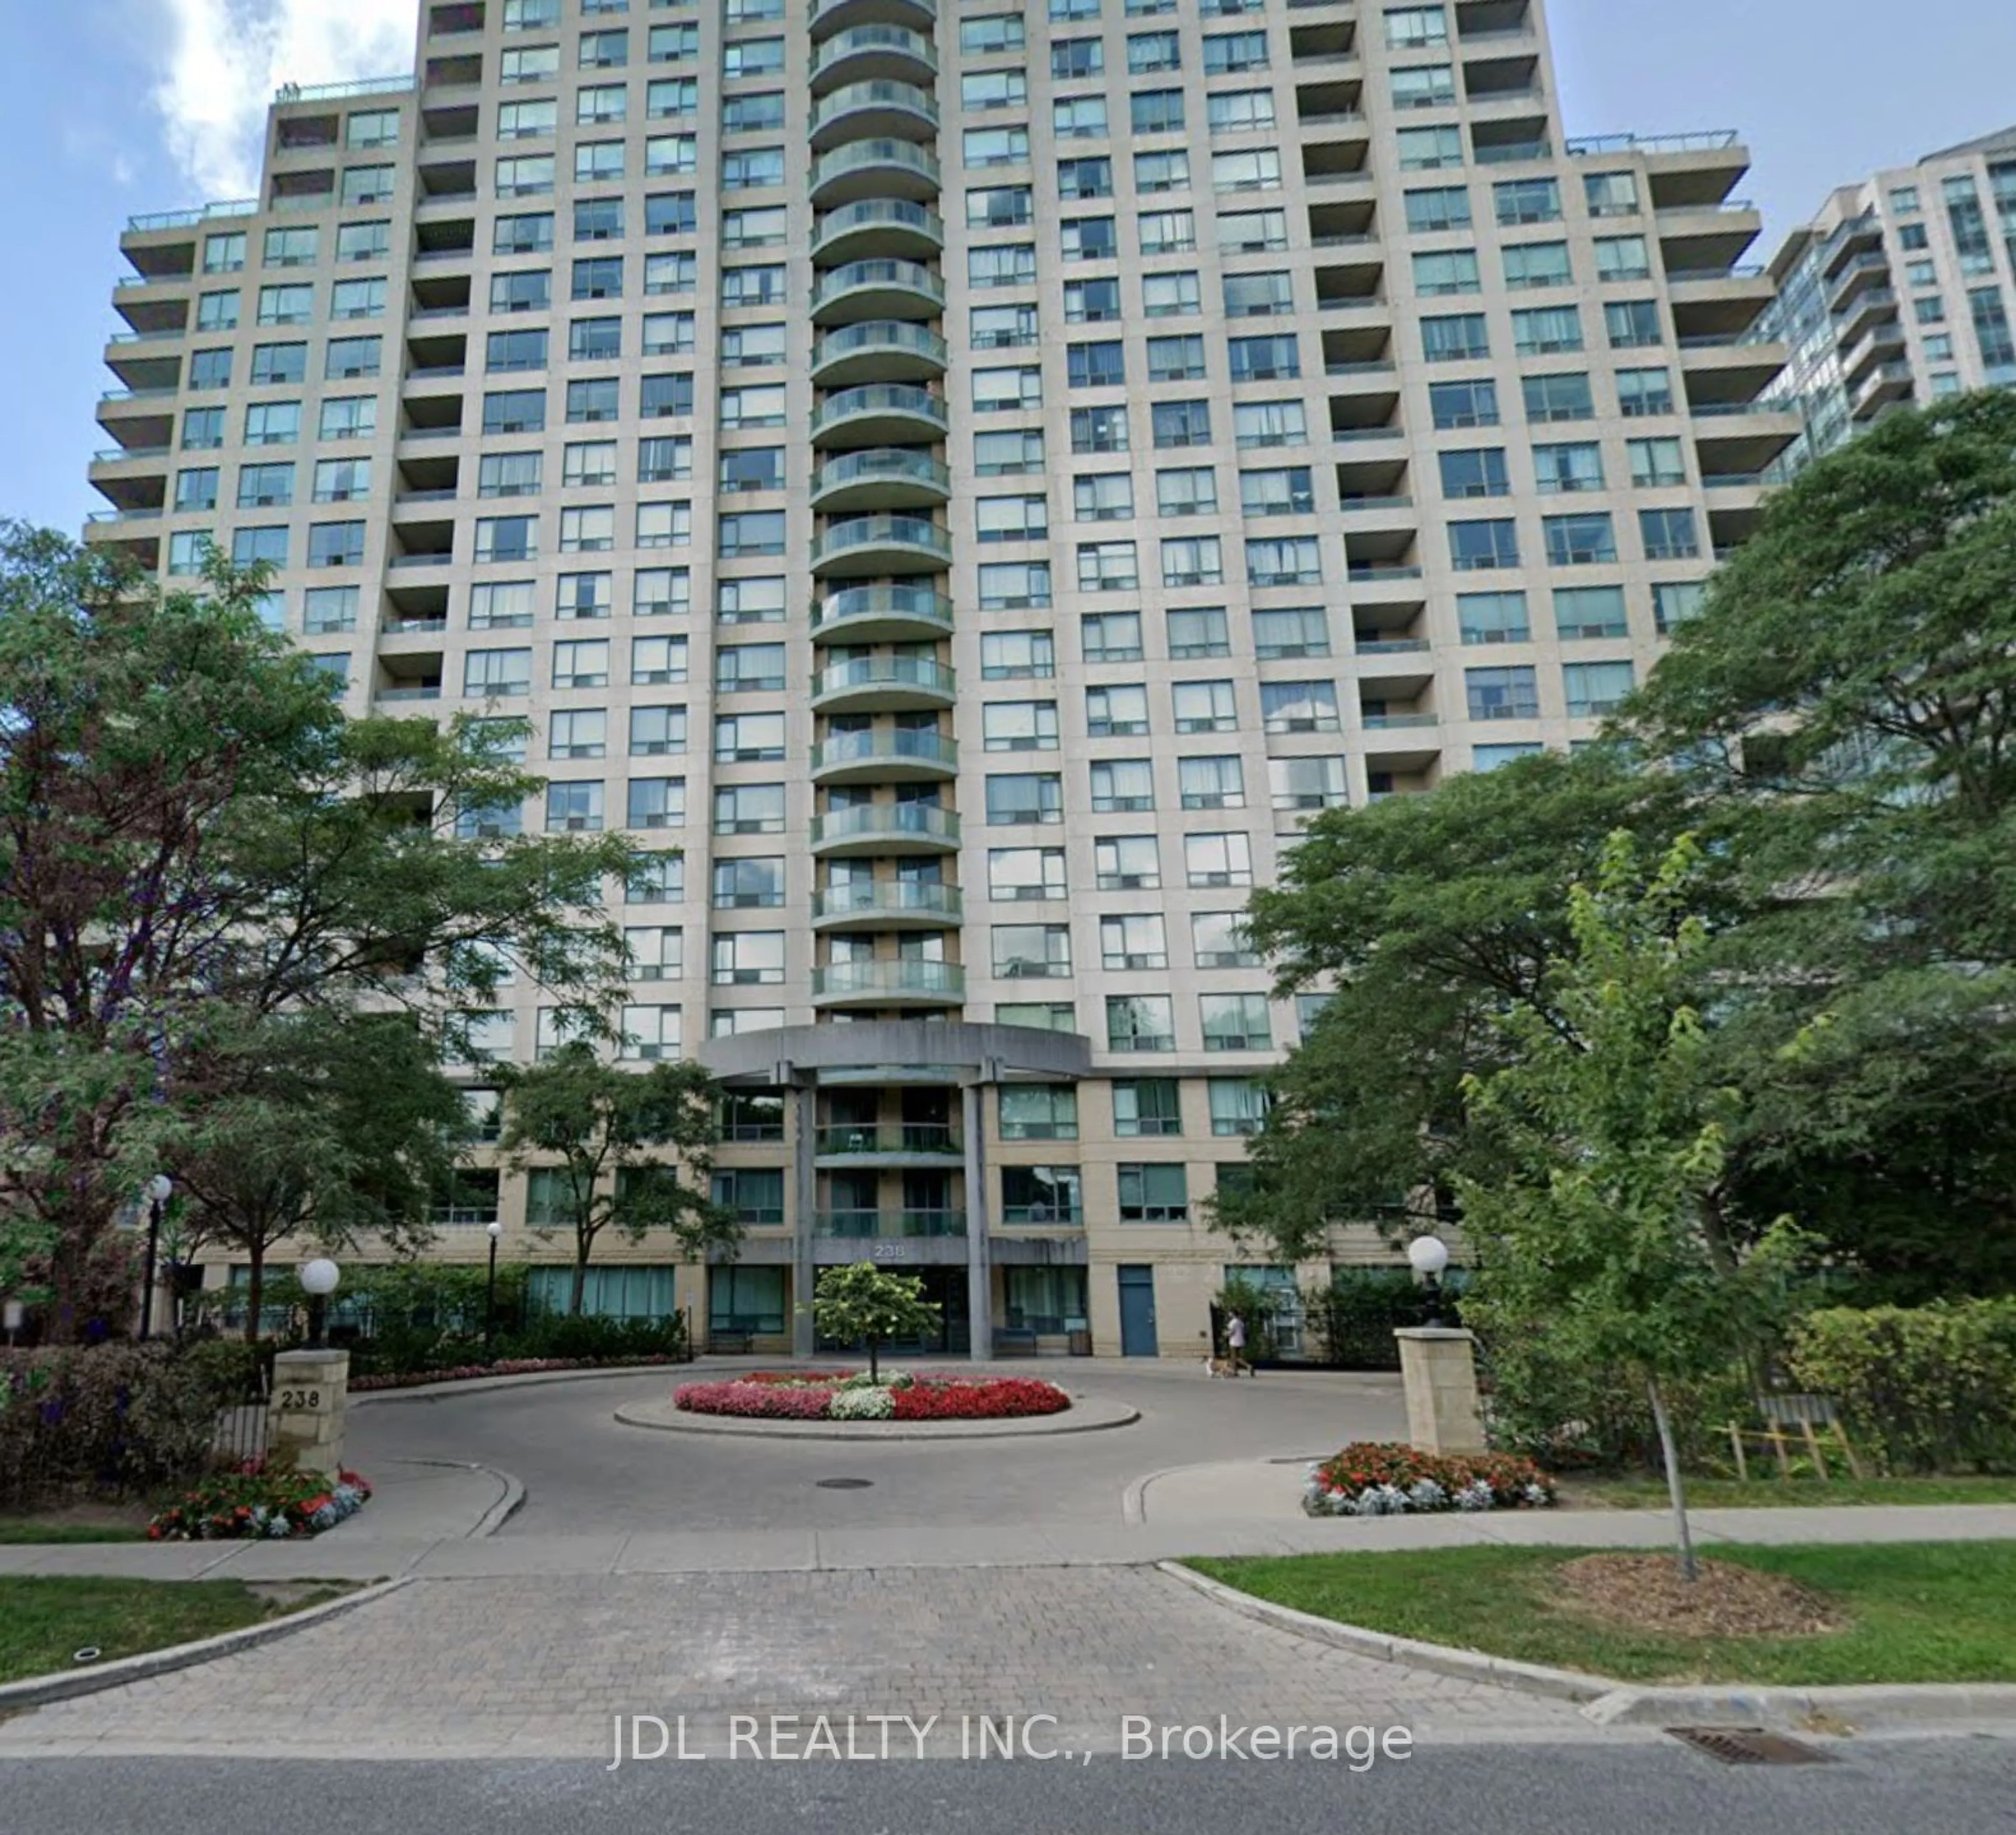 A pic from exterior of the house or condo for 238 Doris Ave #1602, Toronto Ontario M2N 6W1